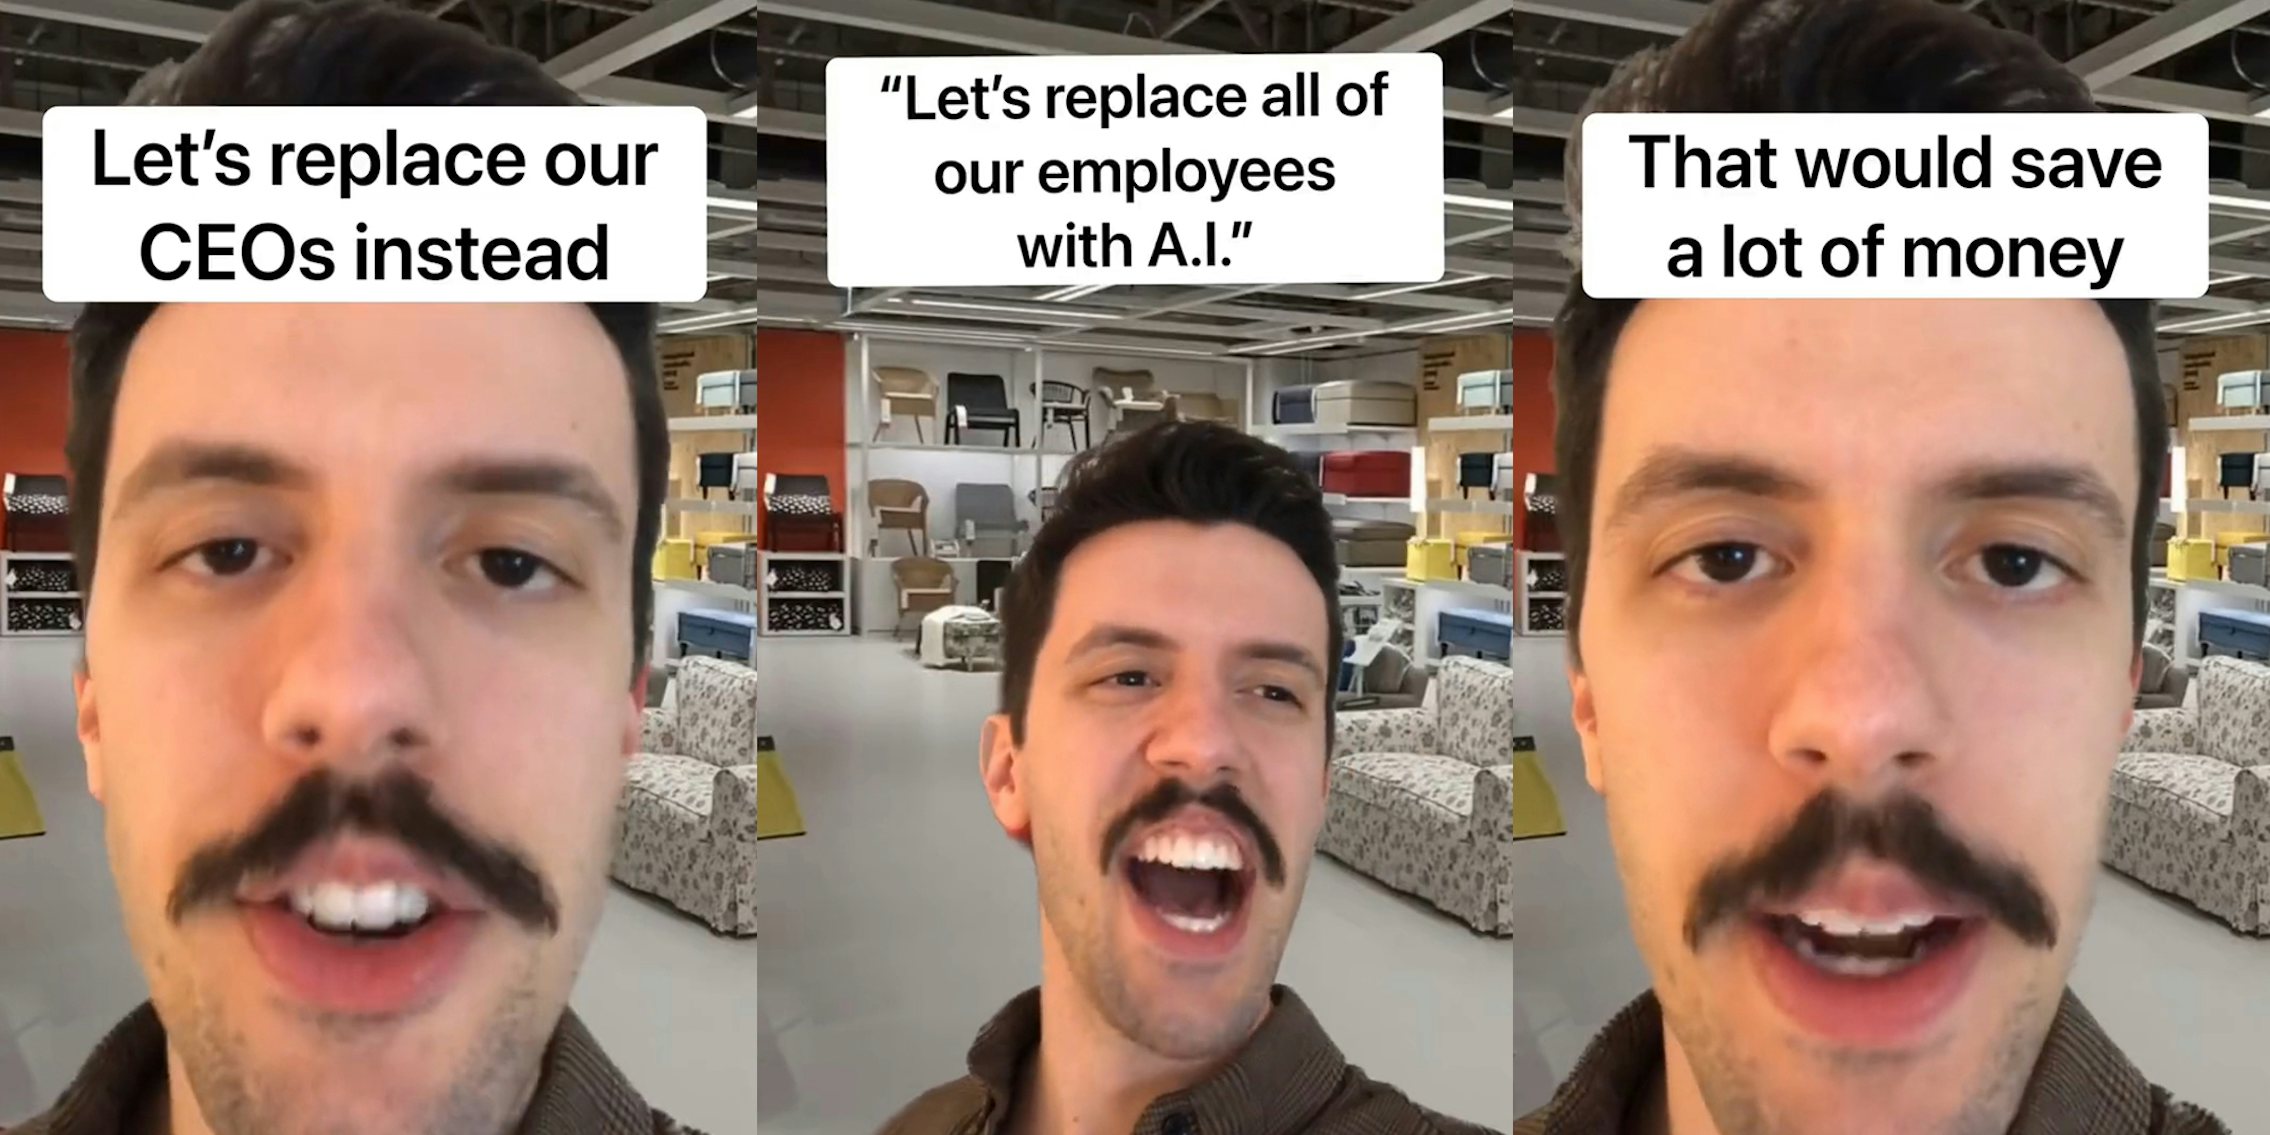 man speaking over IKEA background with caption 'Let's replace our CEOs instead' (l) man speaking over IKEA background with caption ''Let's replace all of our employees with A.I'' (c) man speaking over IKEA background with caption 'That would save a lot of money' (r)